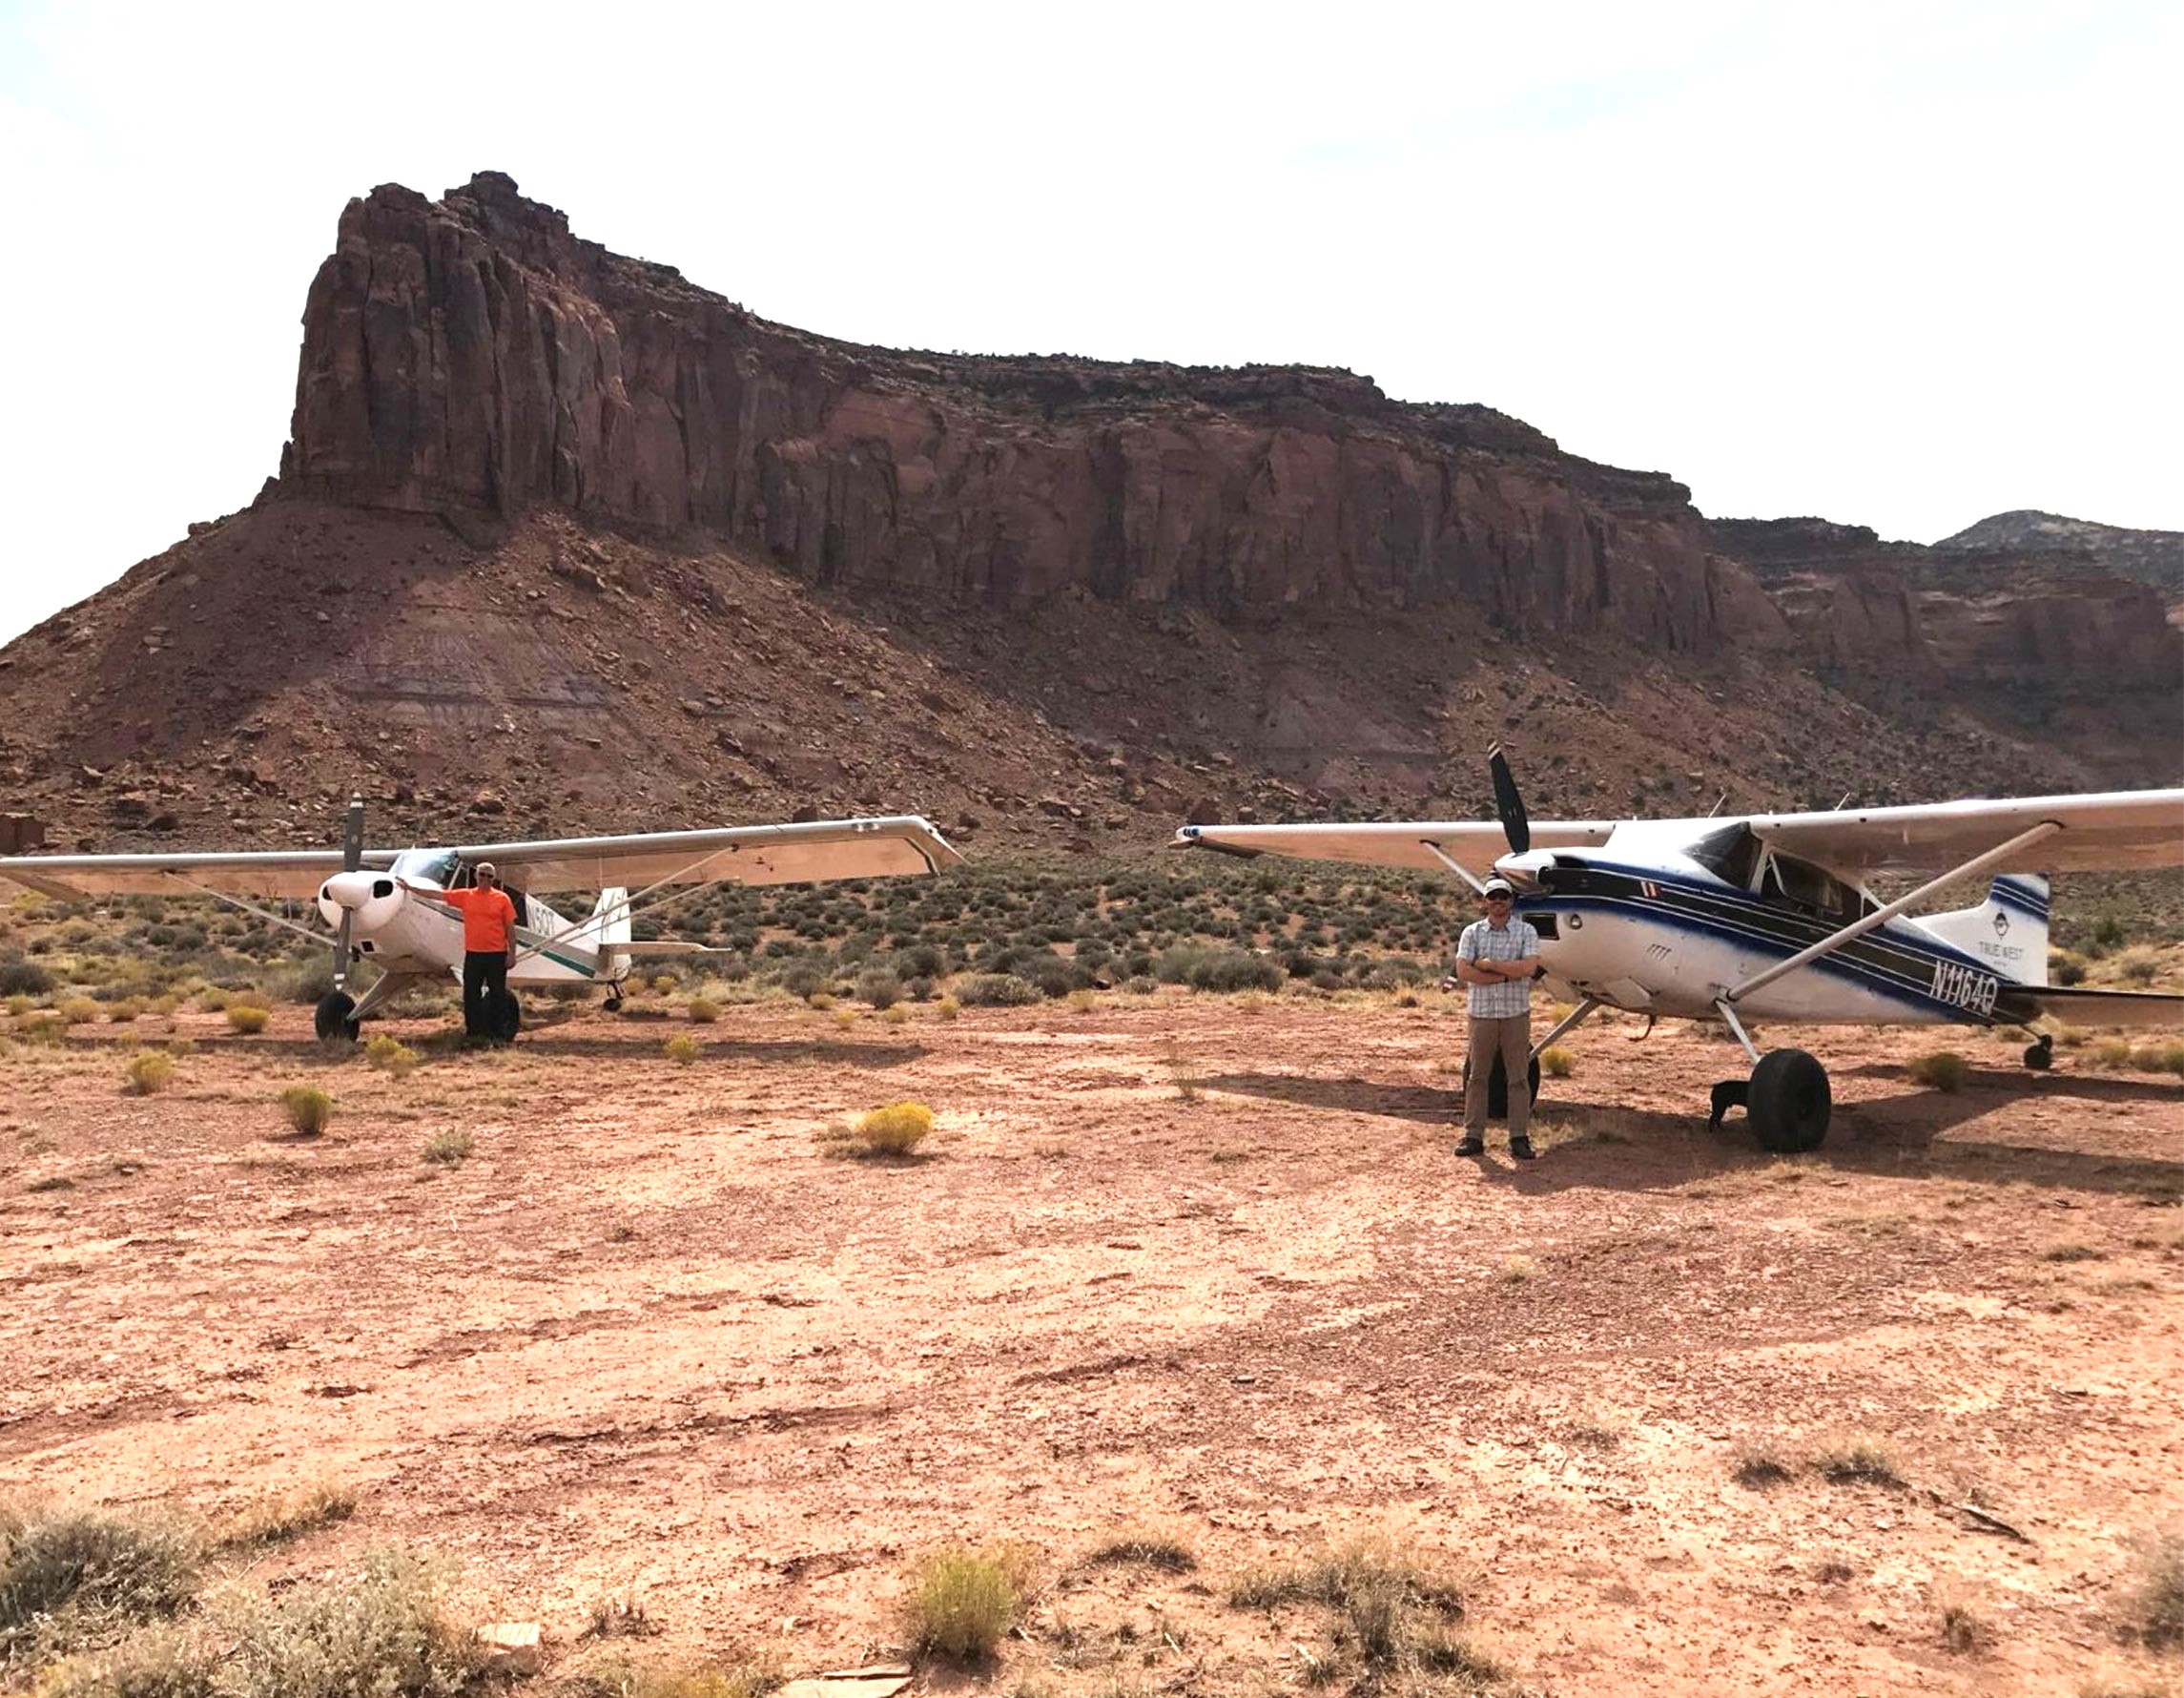 Backcountry airplanes